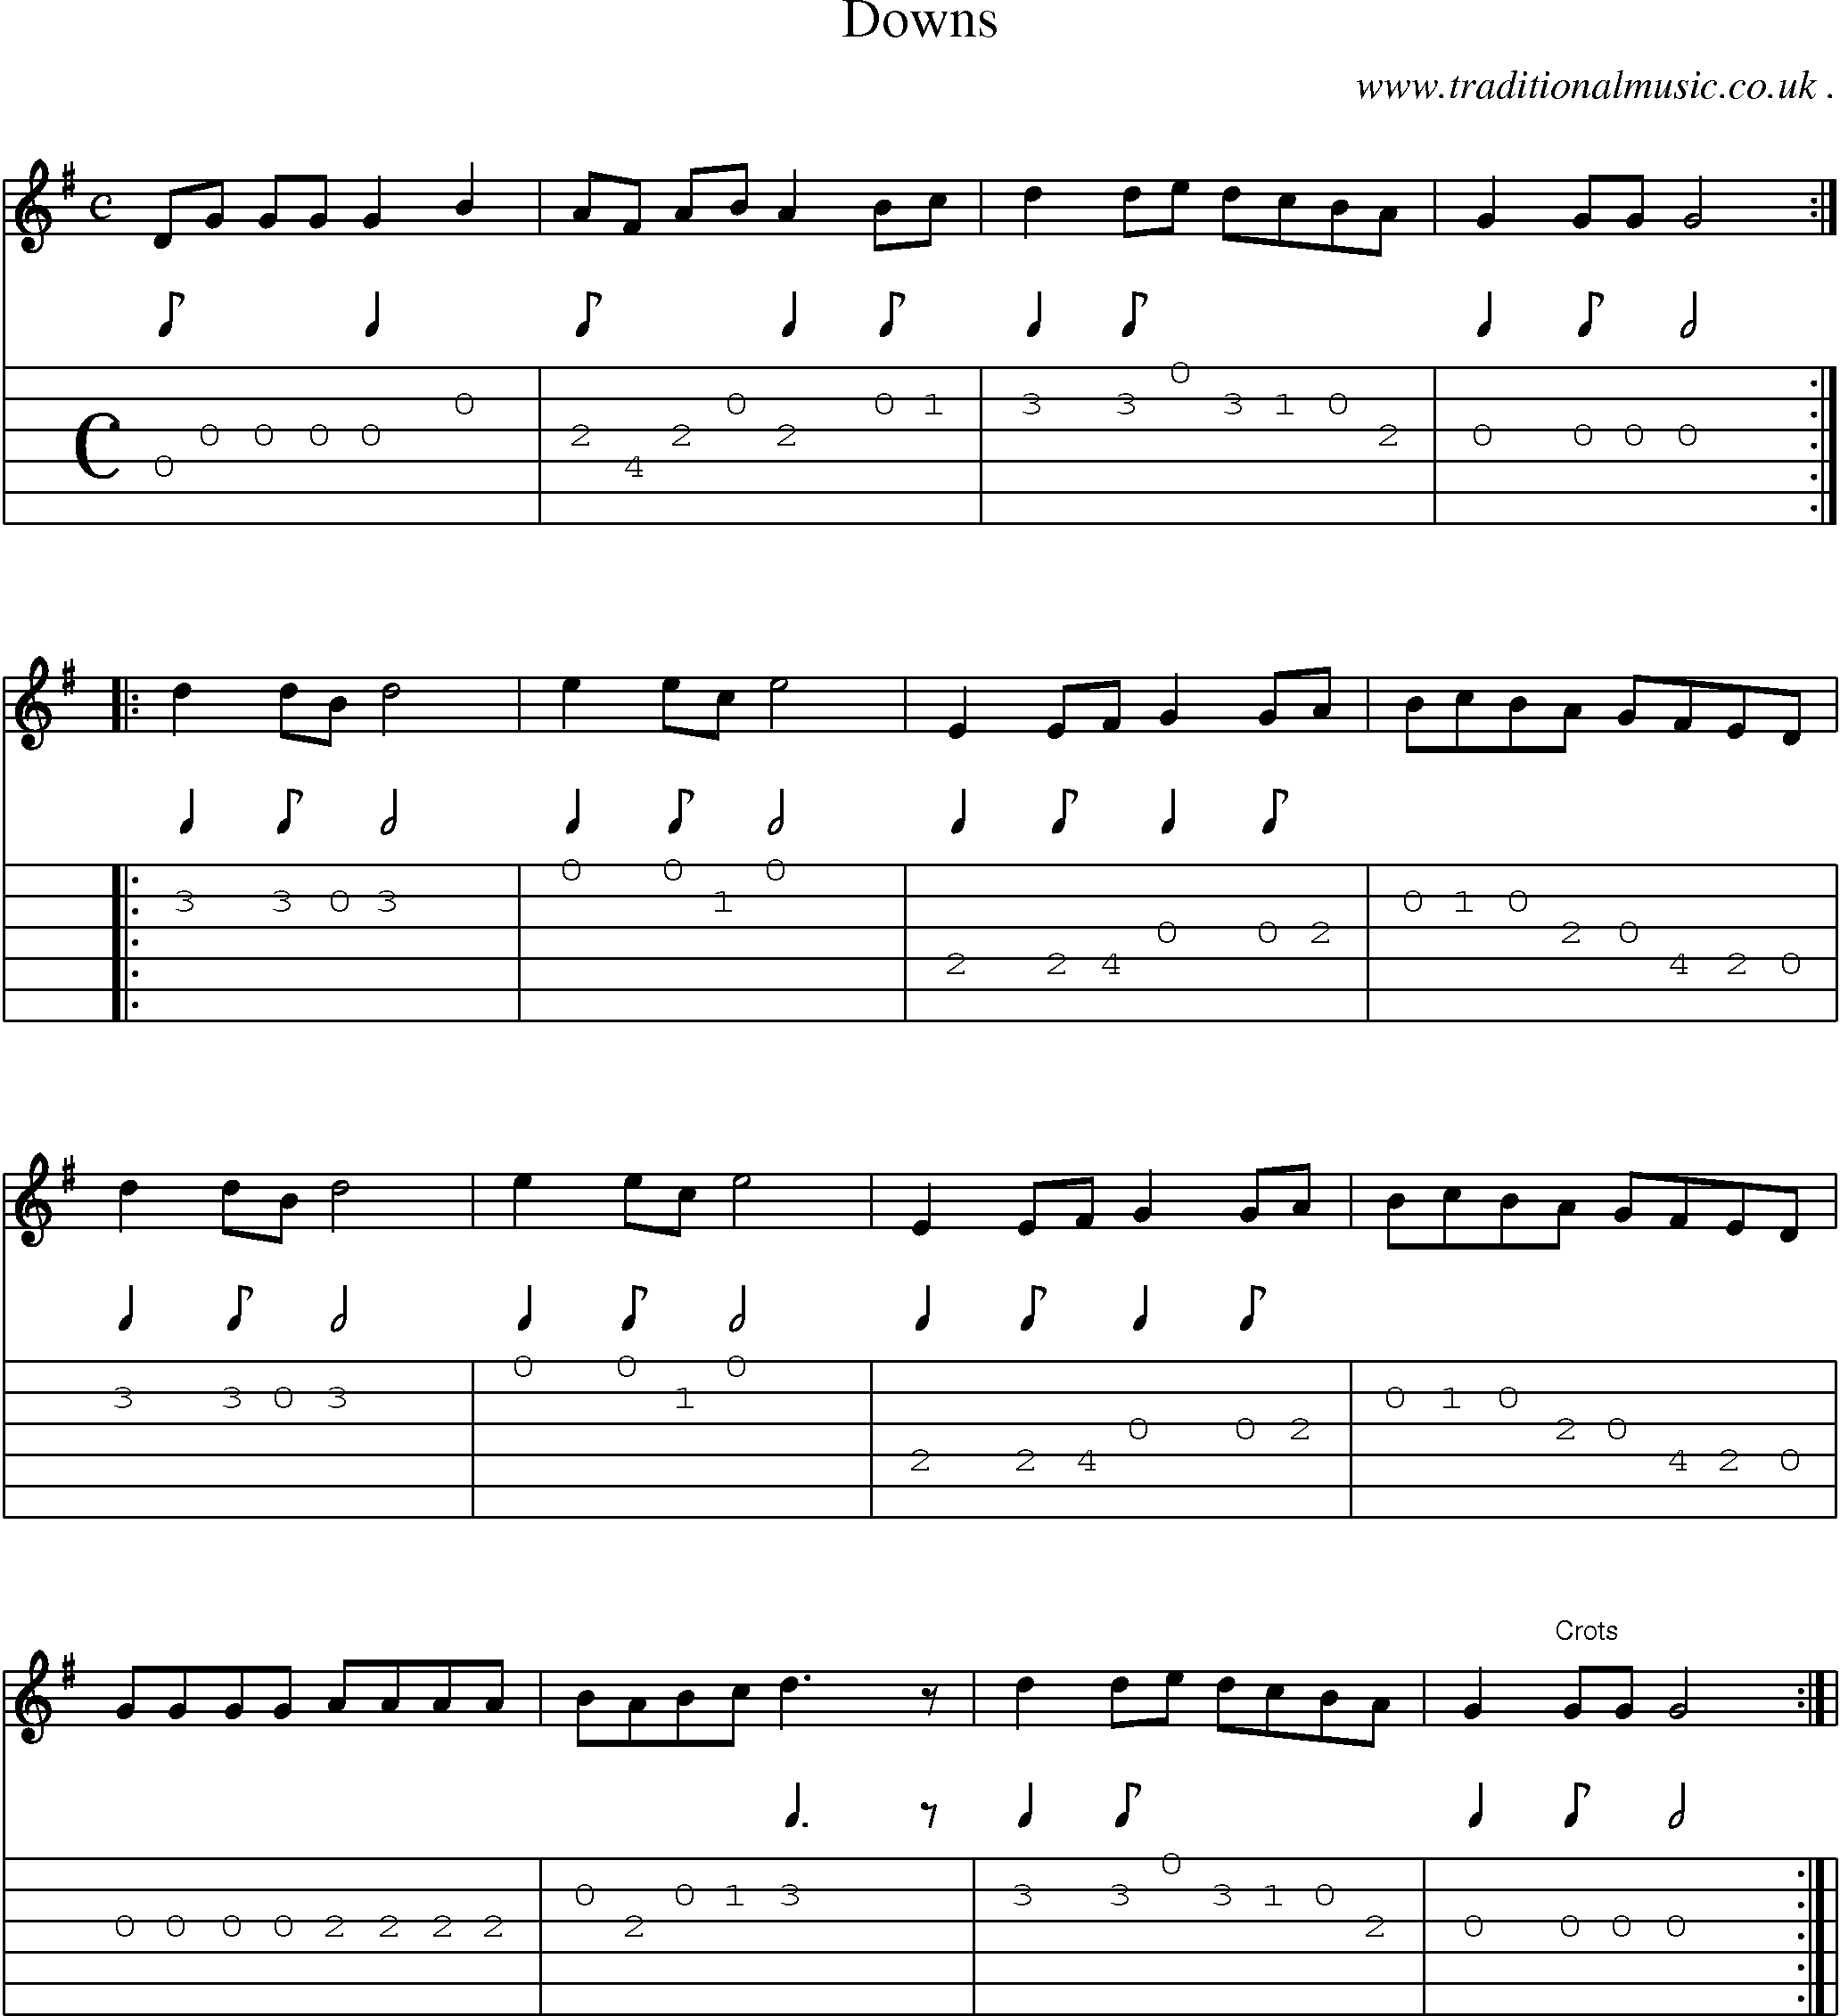 Sheet-Music and Guitar Tabs for Downs